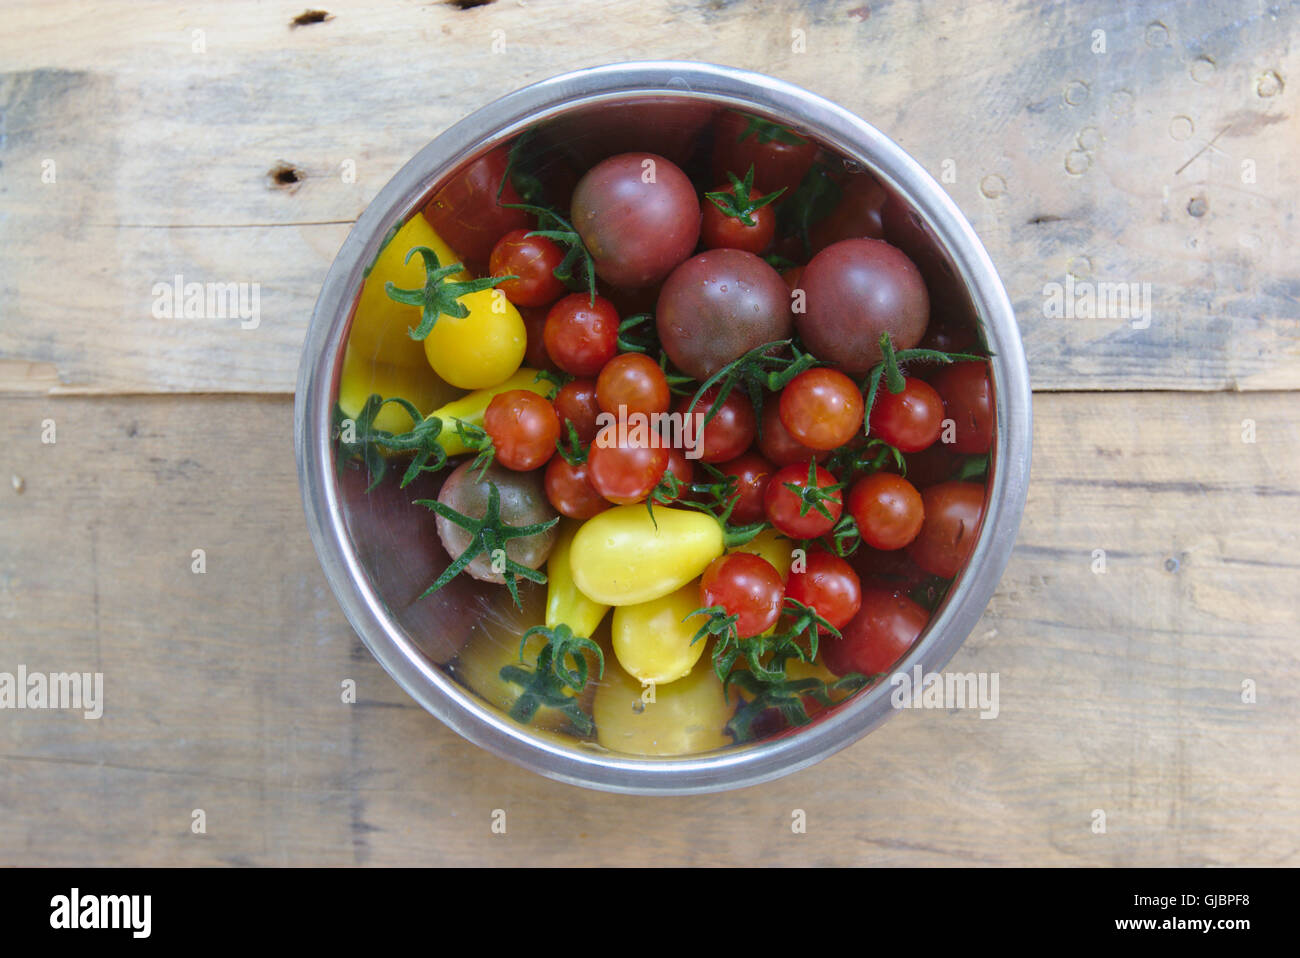 Mix of various kinds of tomatoes Stock Photo